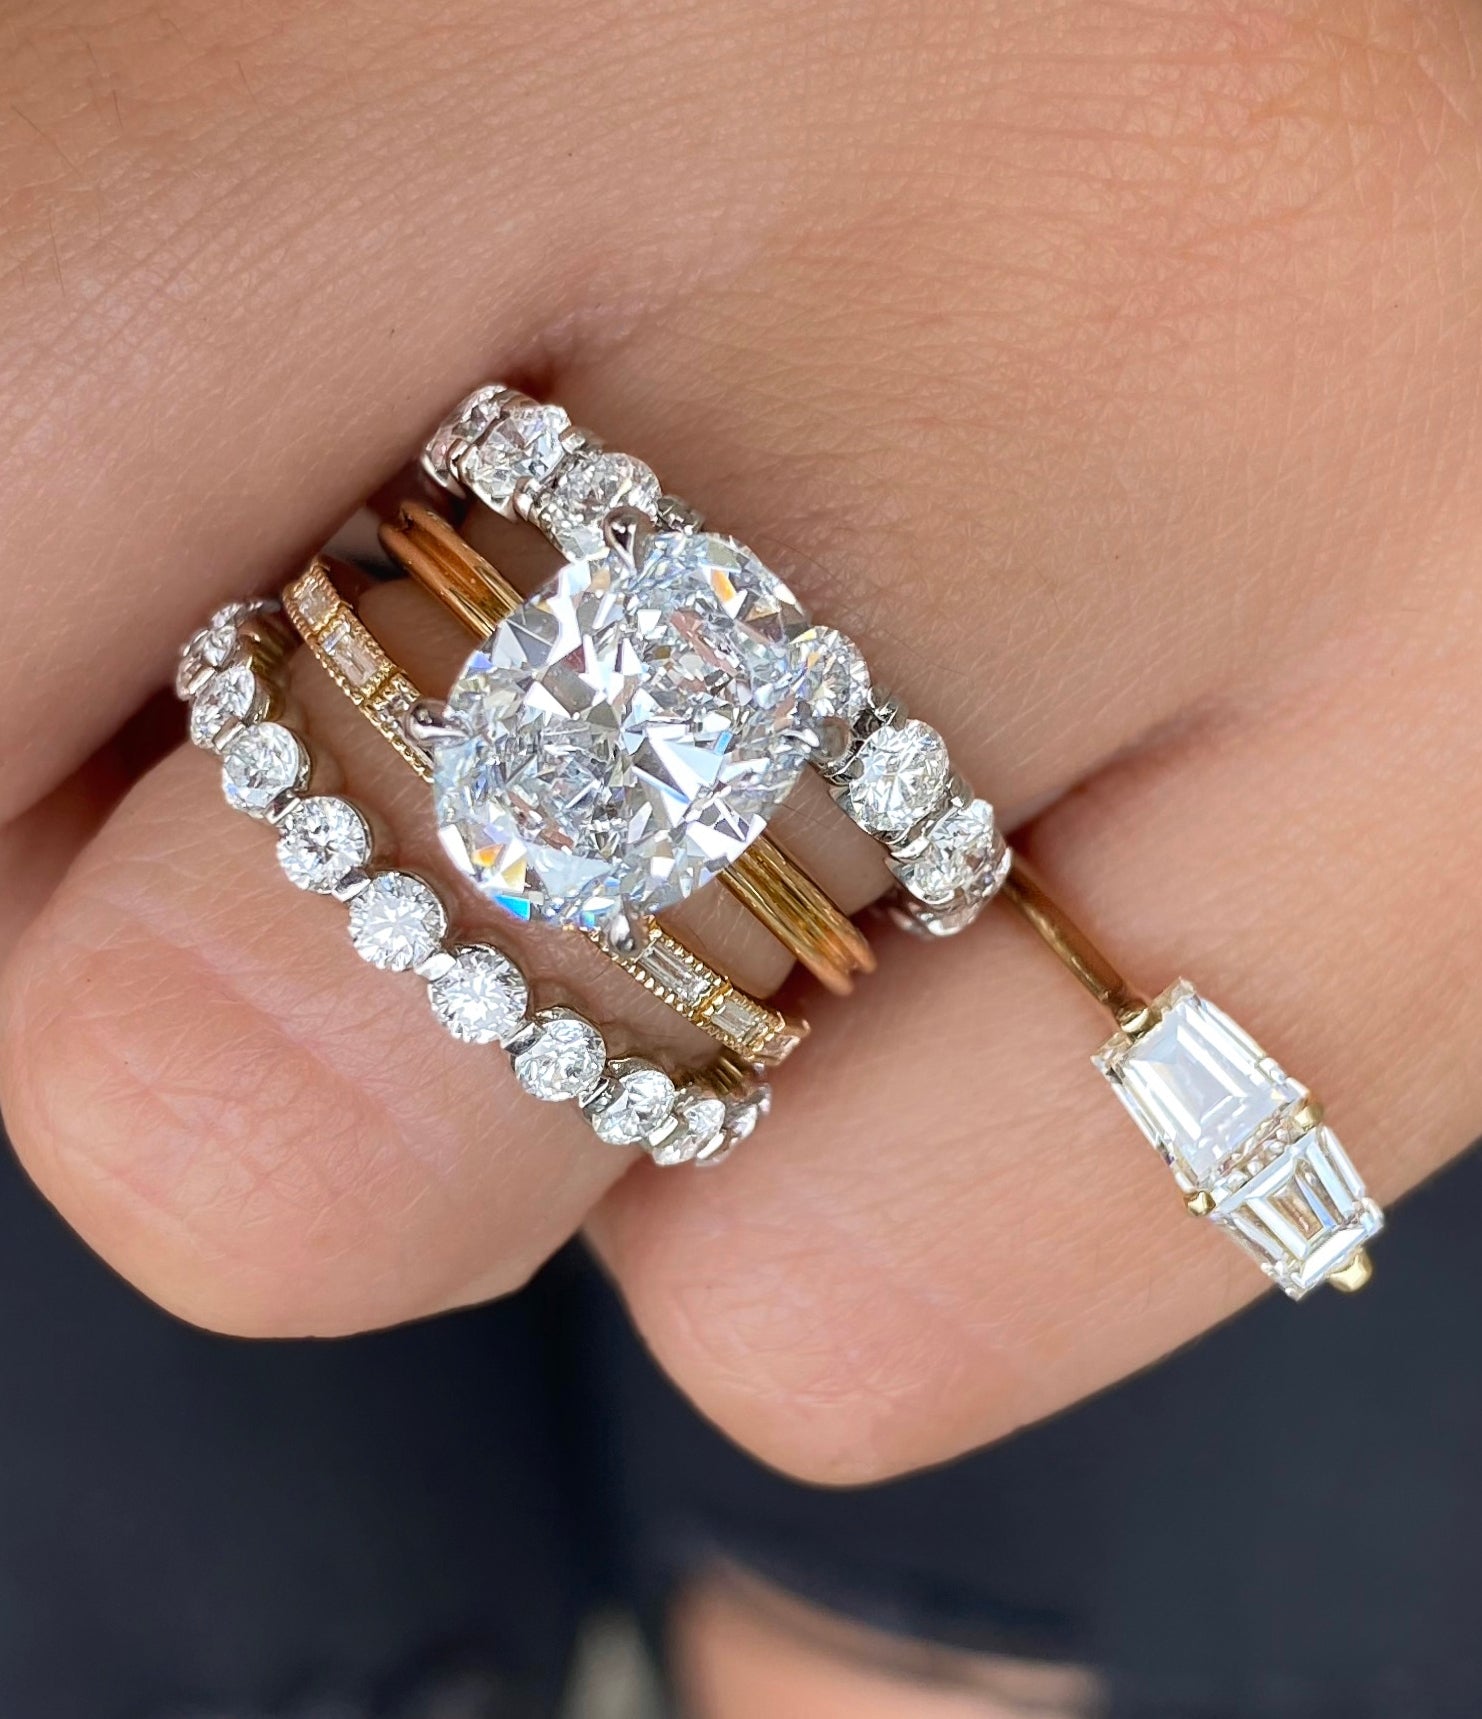 1 Jewelry Store in the U.S., Engagement rings and Custom design